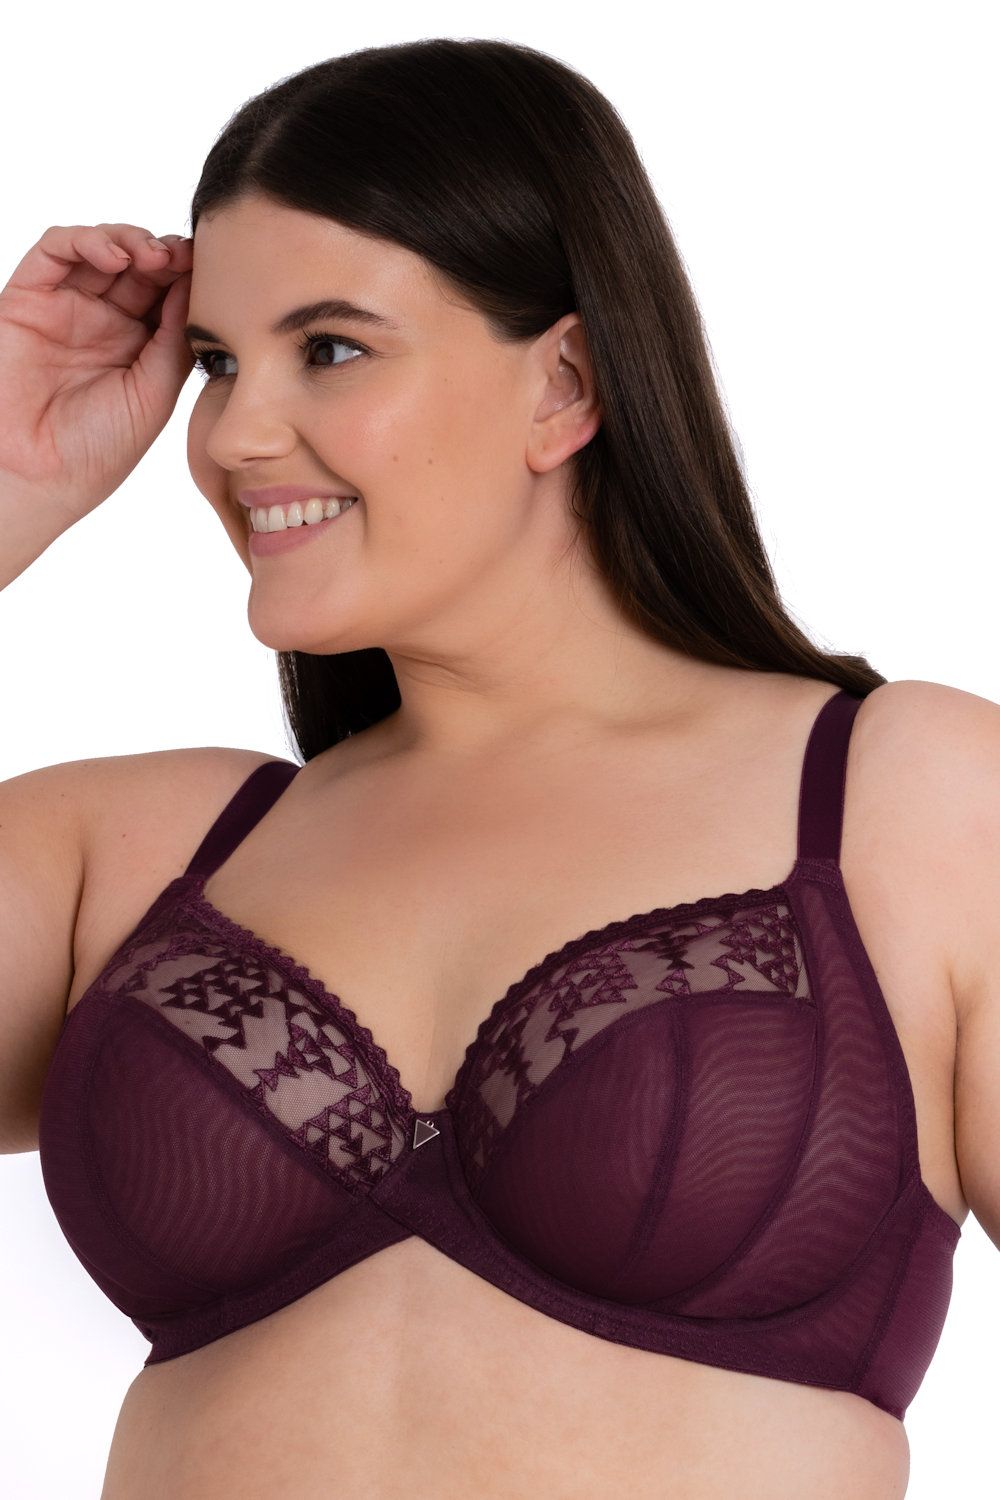 Bra Fitting Guide  Lumingerie bras and underwear for big busts